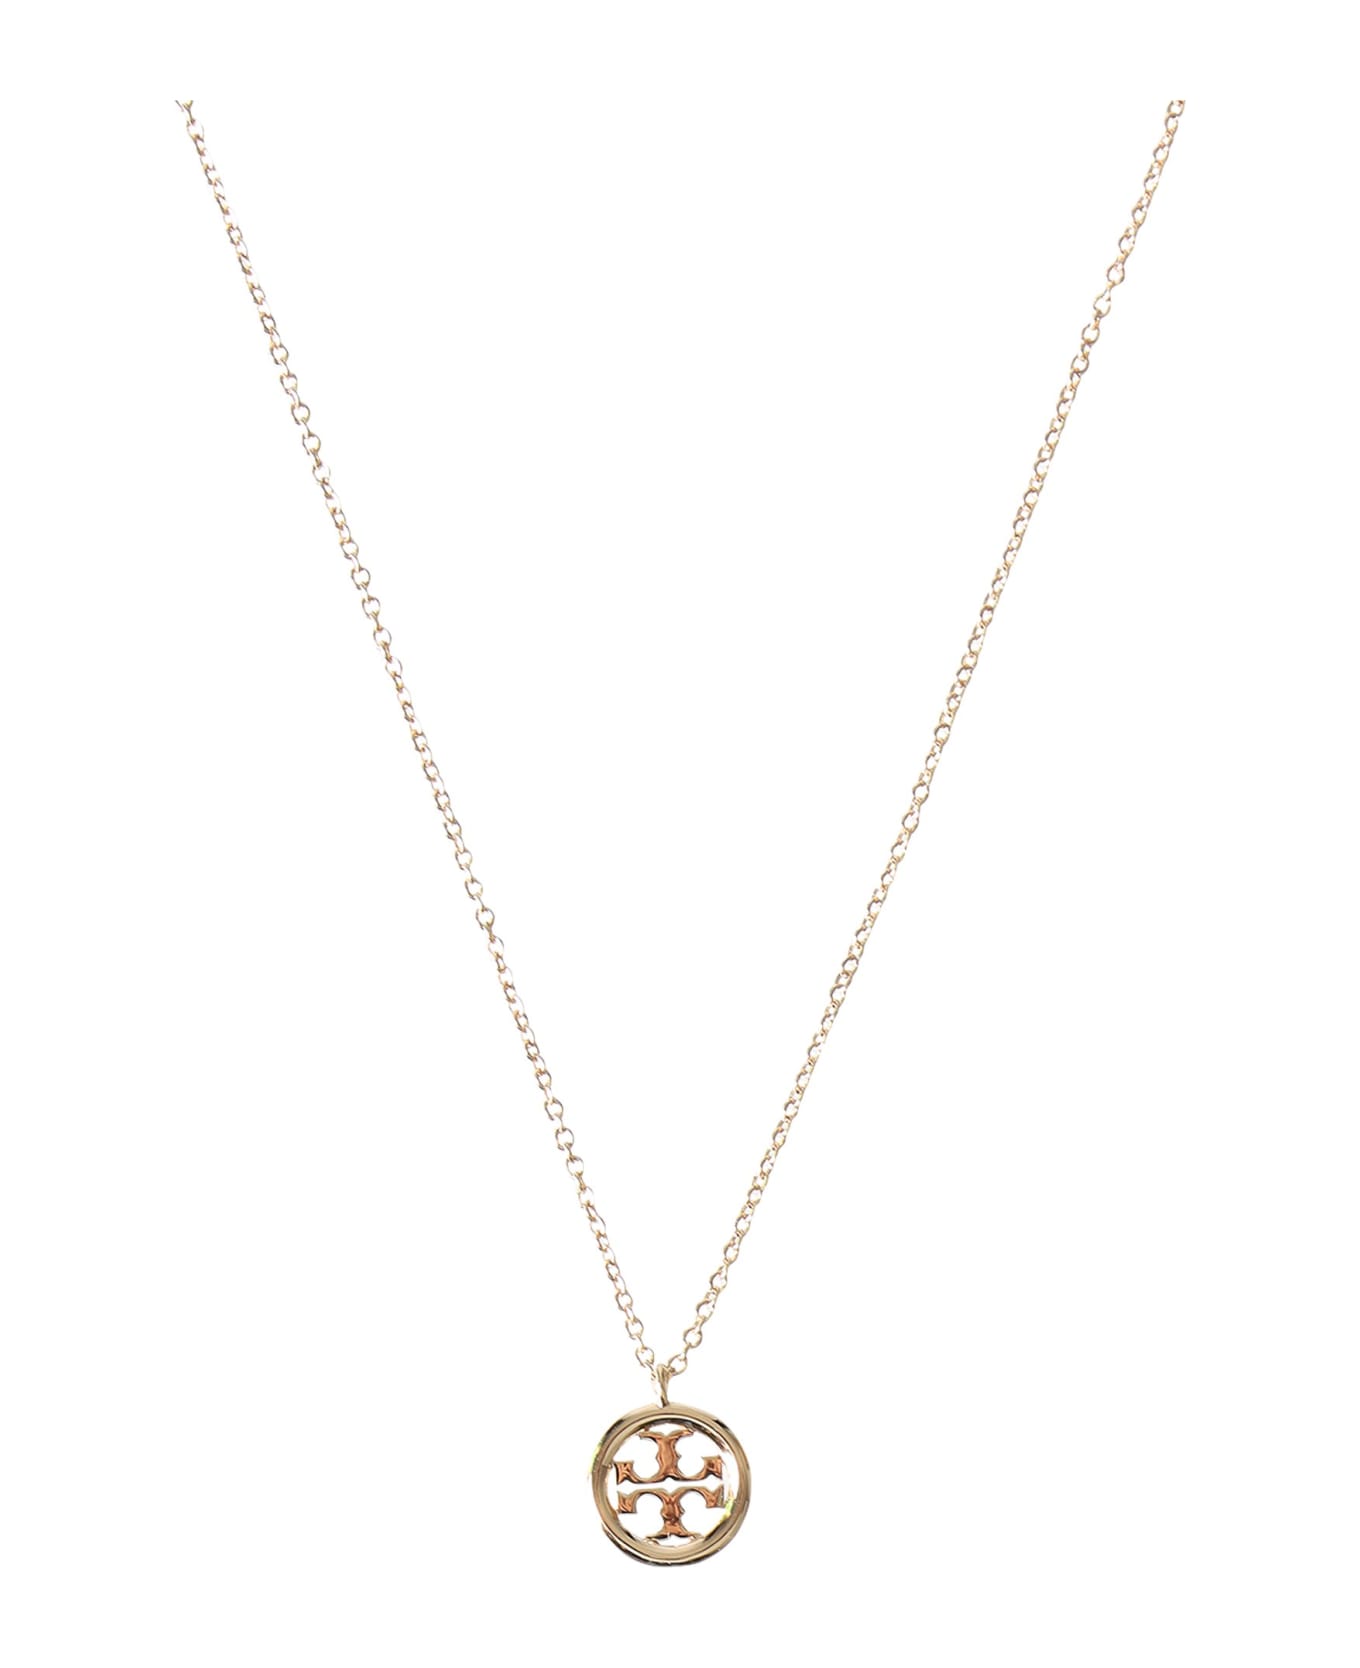 Tory Burch Miller Necklace - ORO